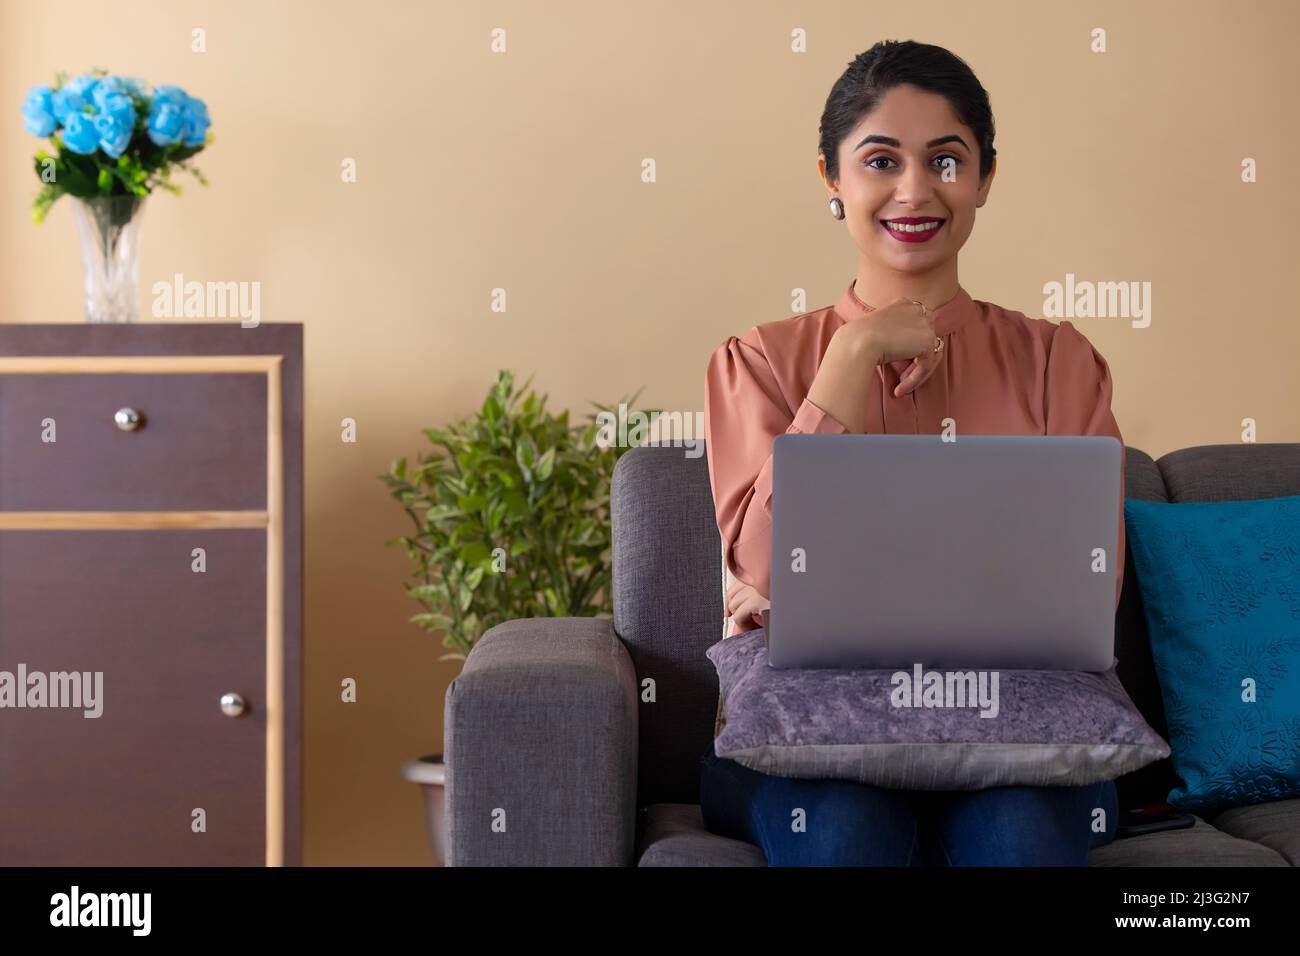 Happy Indian woman working from home using laptop Stock Photo